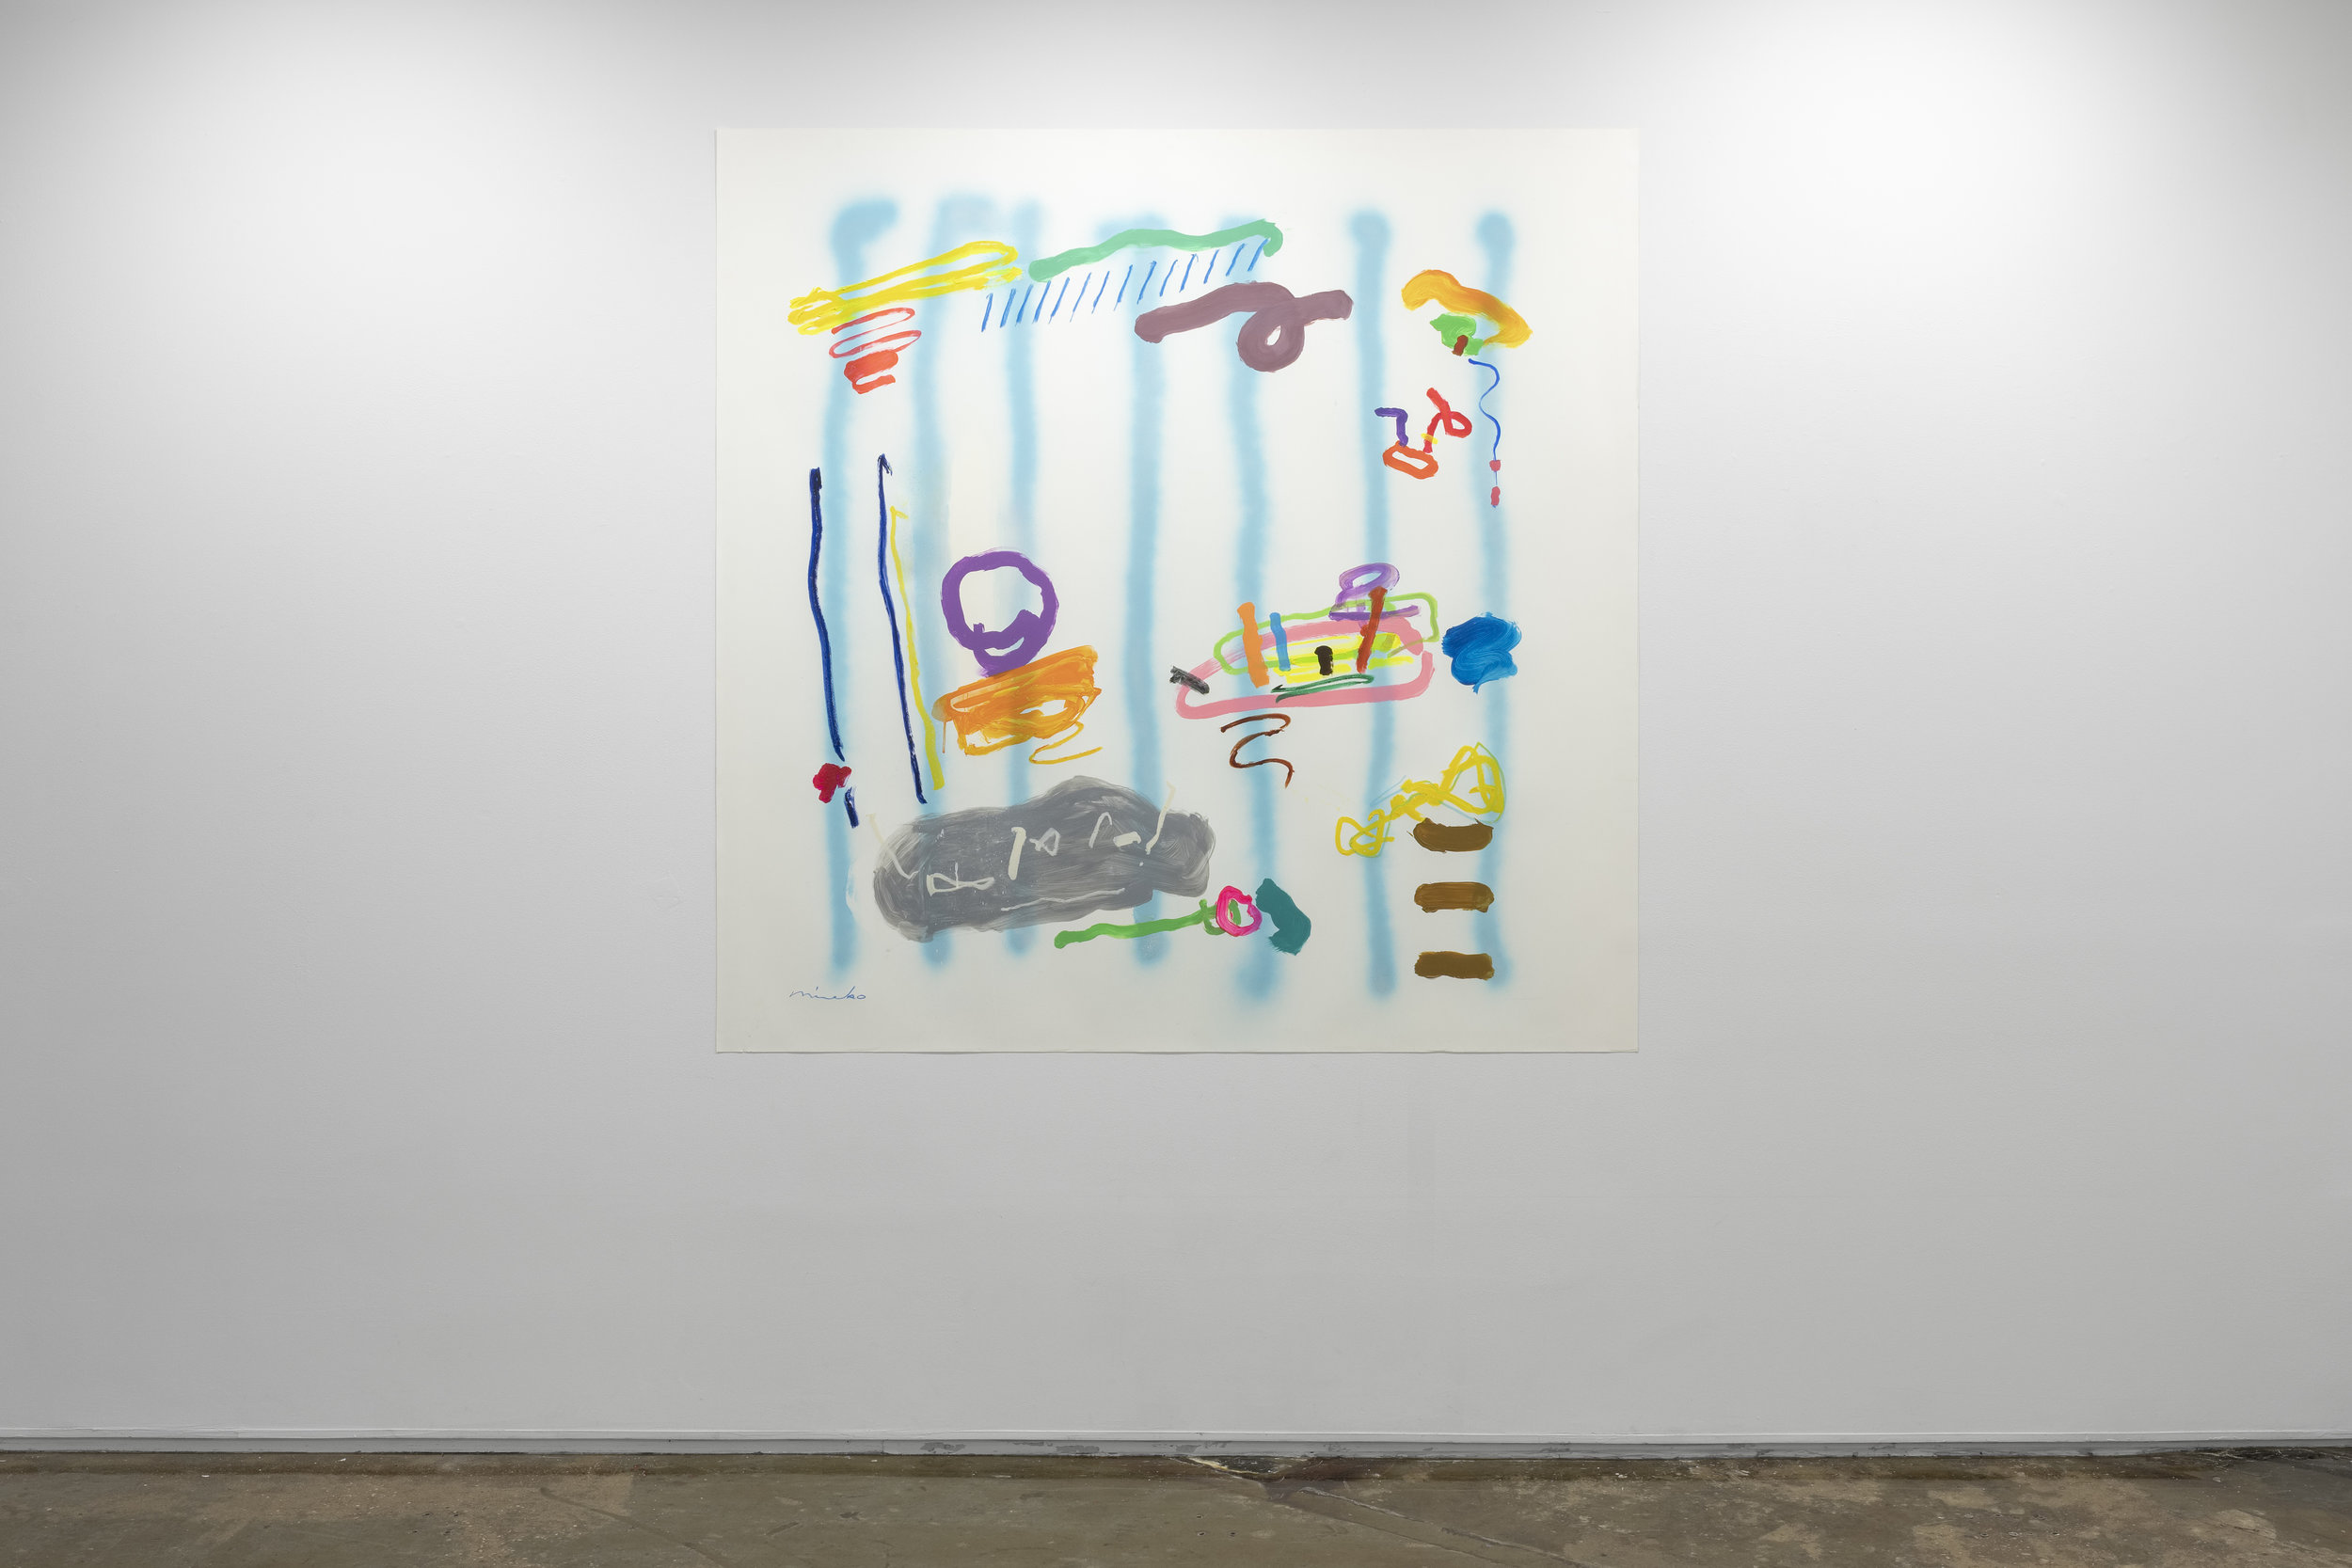   Captain Hook’s Vacuum Cleaner , 2017  60x 60 in. Spray paint, acrylic, oil stick, and oil pastel on Yupo 